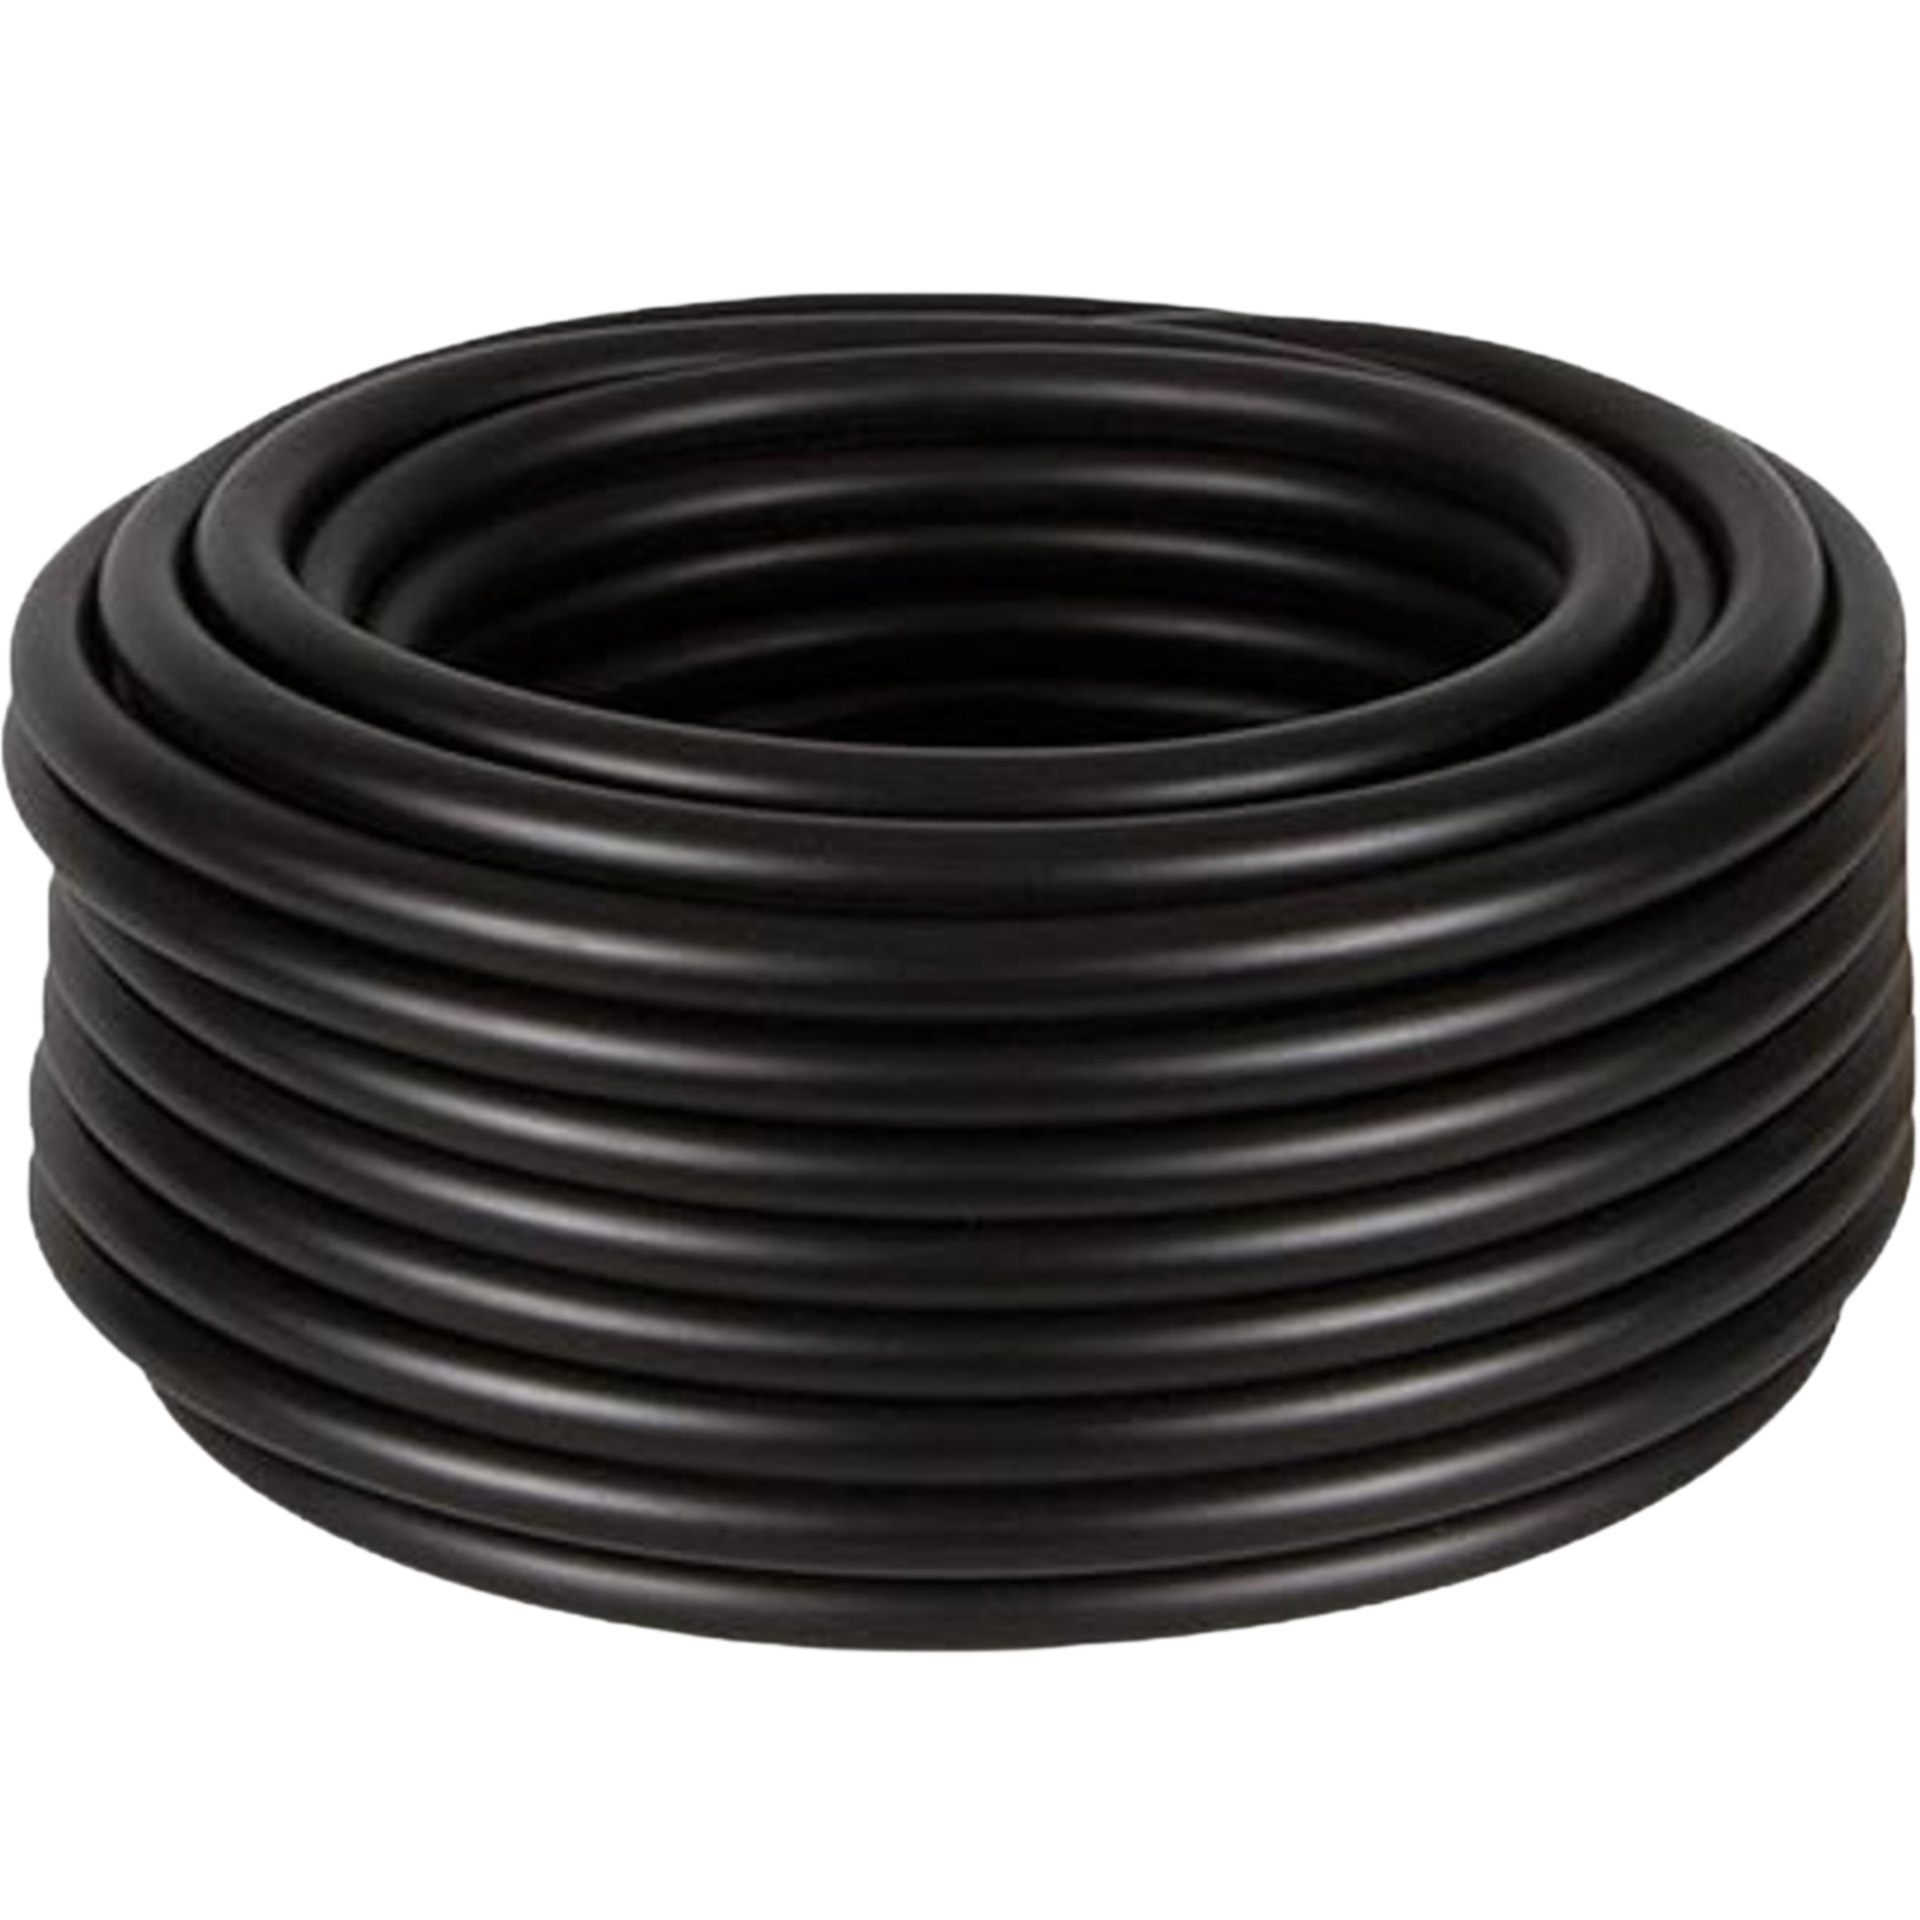 Pond Pro 5/8" Sinking Airline tubing